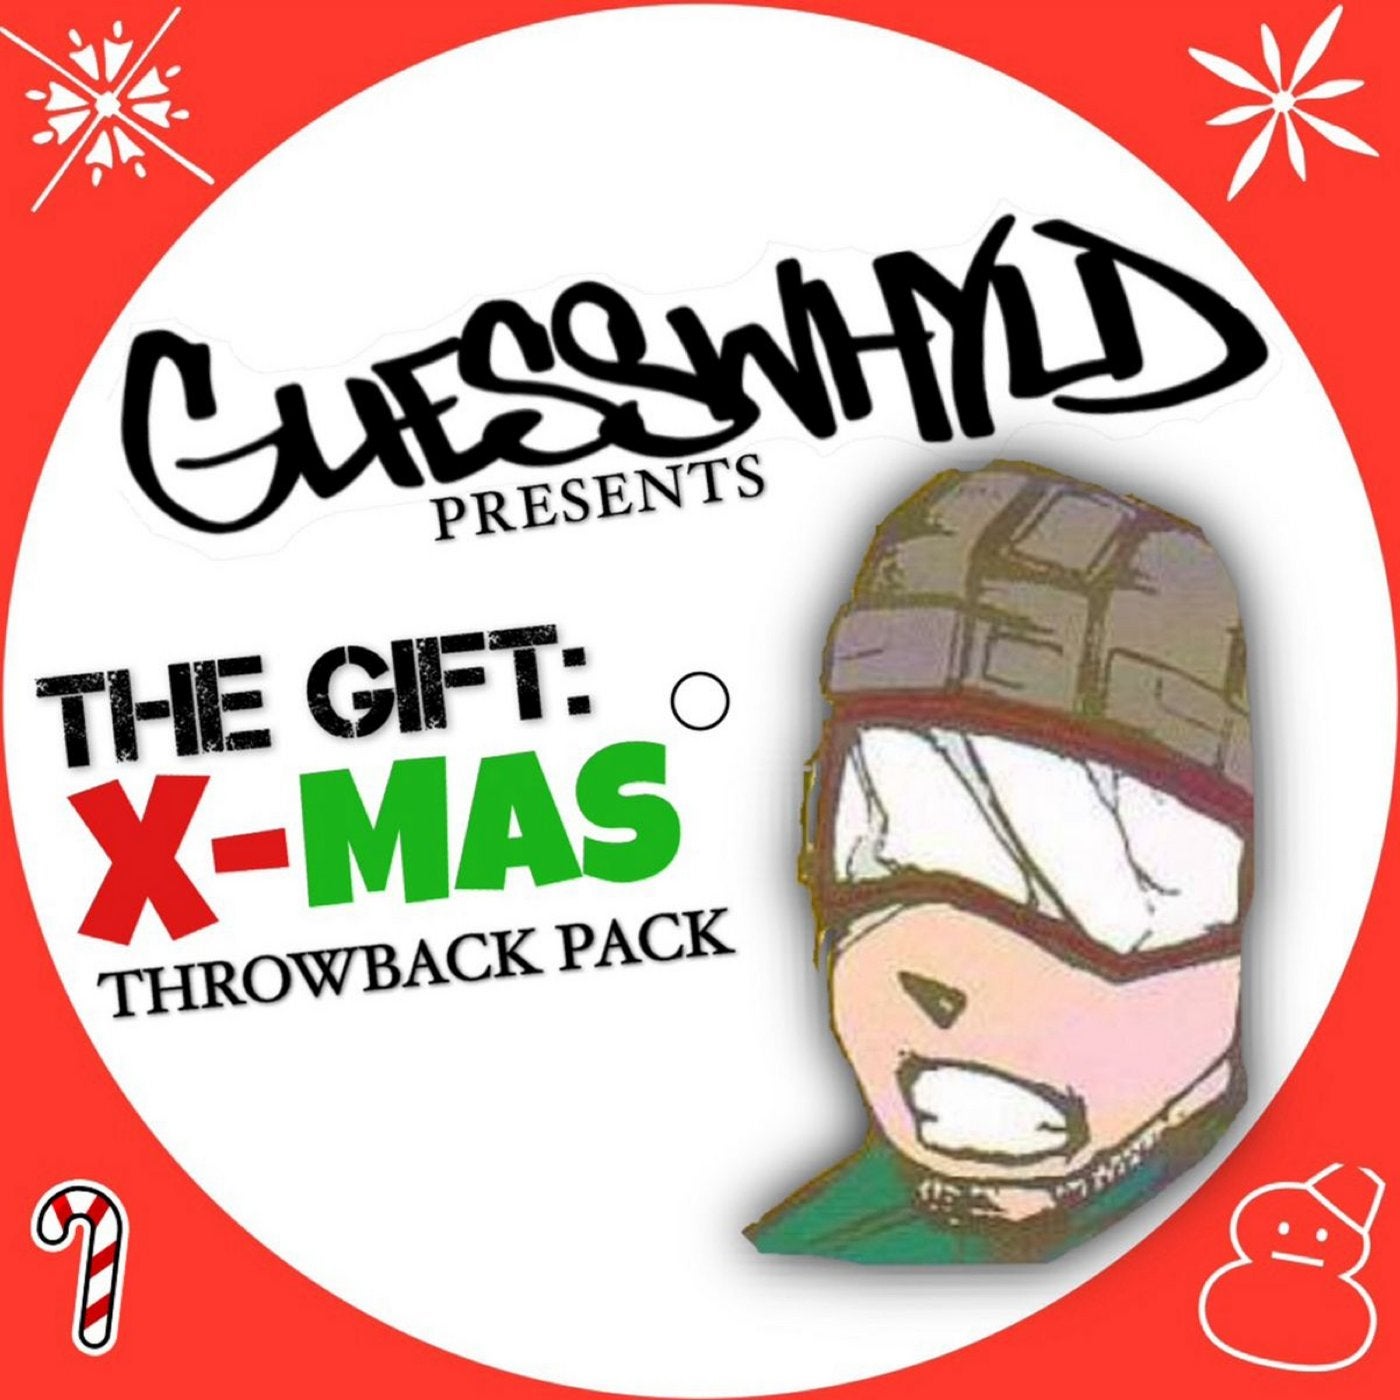 GuessWhyld Presents The Gift: X-Mas Throwback Pack